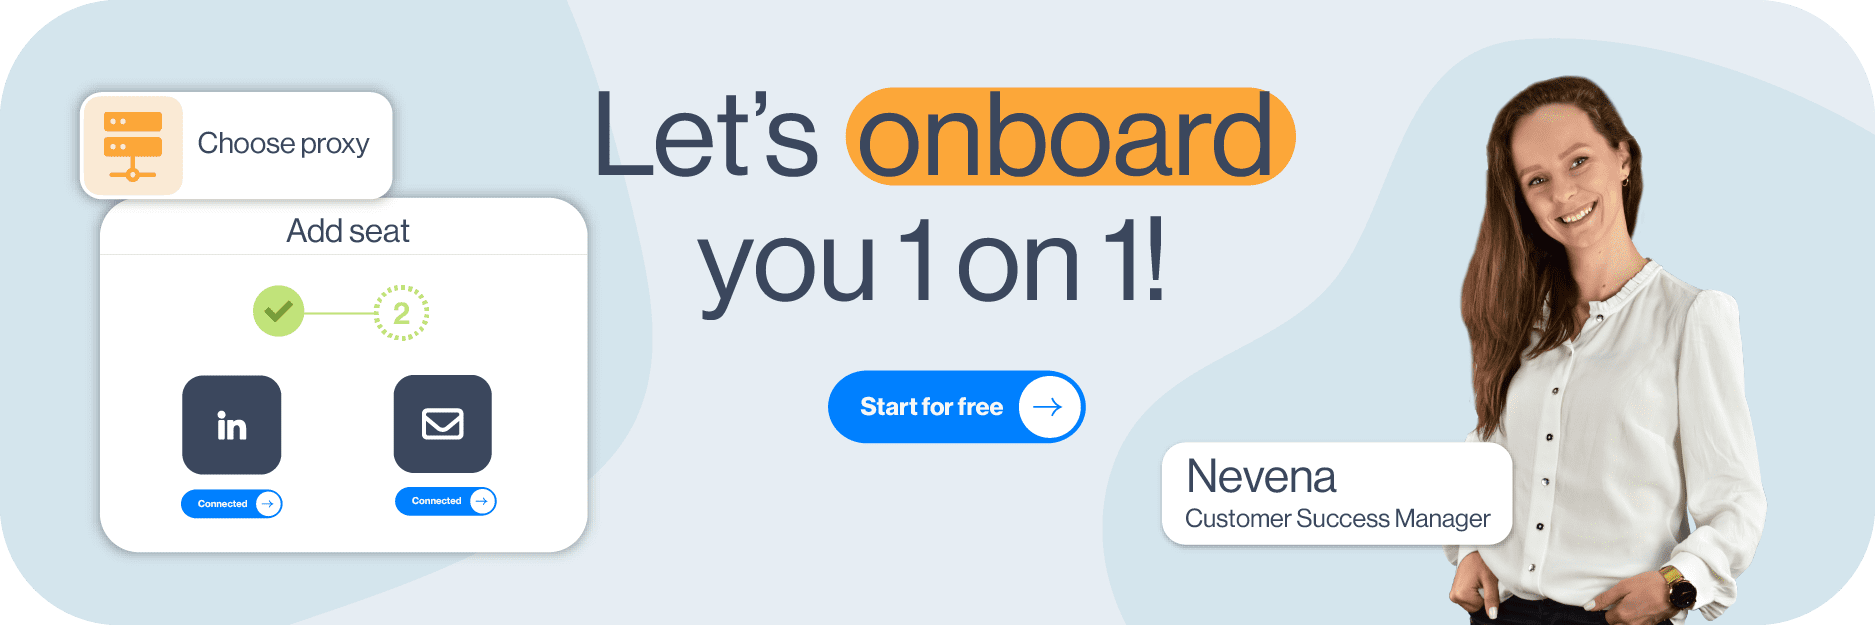 Image of Free Trial CTA banner with Skylead's Customer Success Manager, Nevena and text "Let's onboard you 1 on 1!"